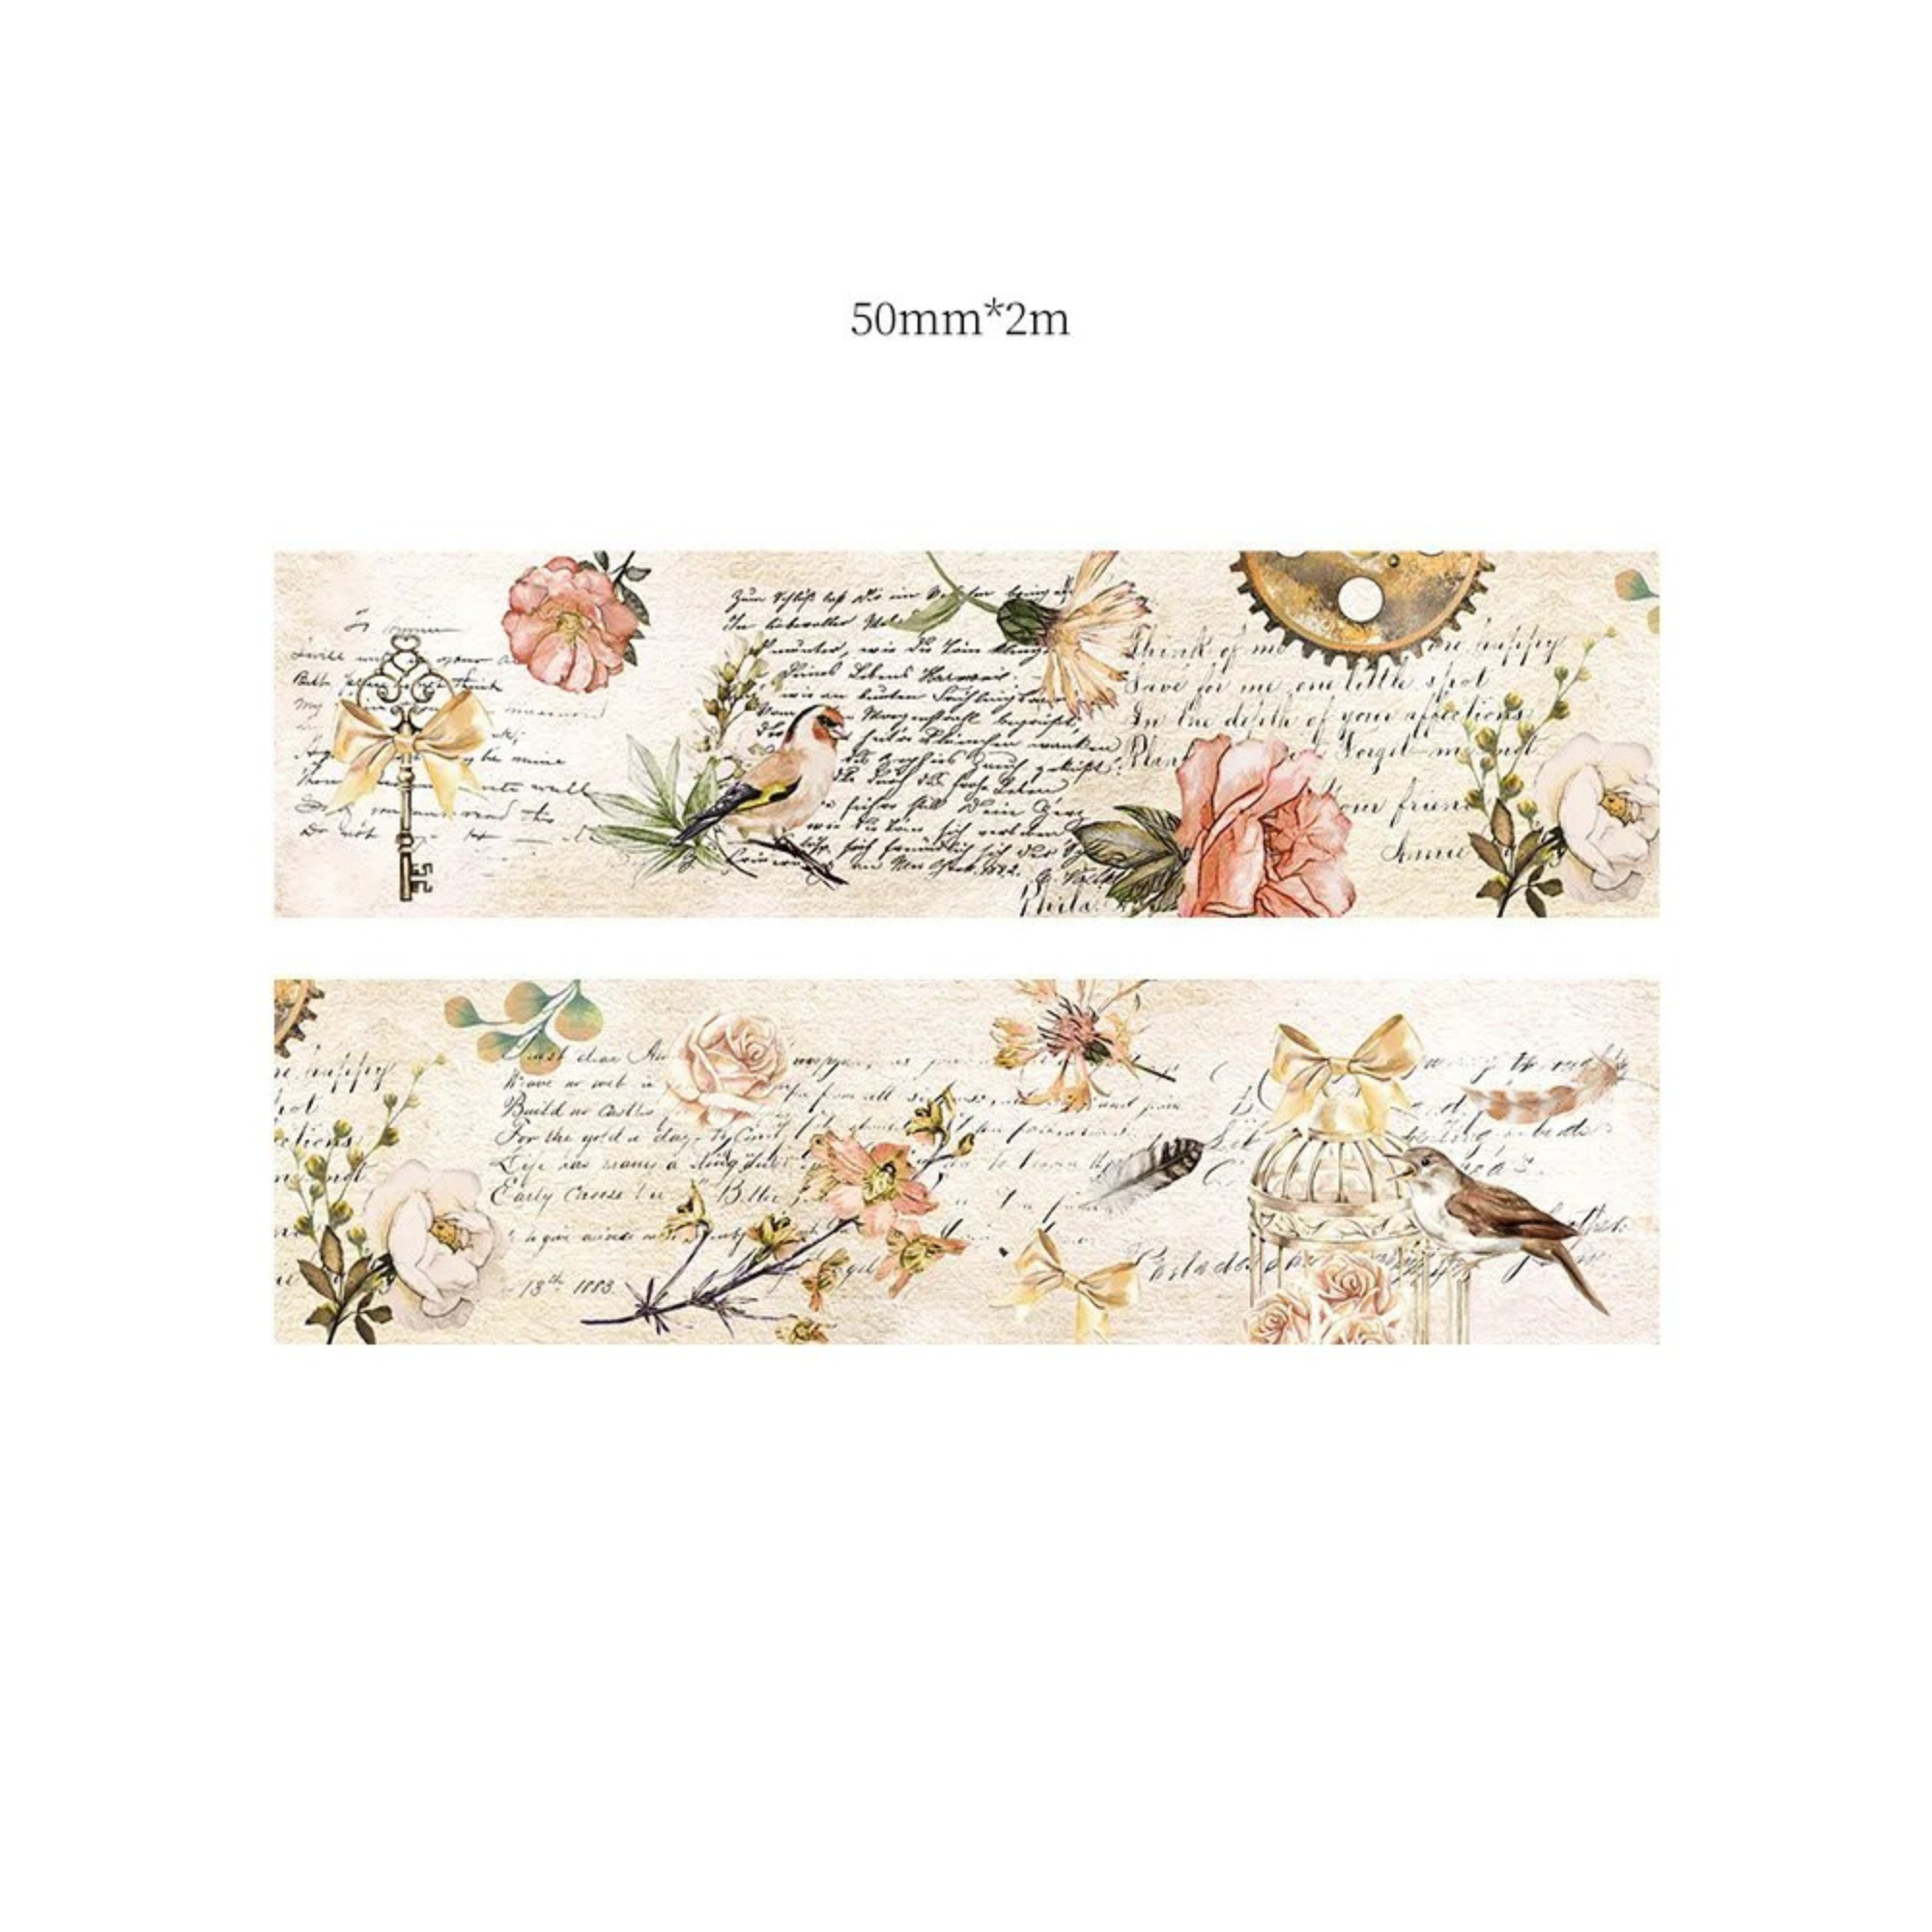 Handwritten Letter and Flower Adhesive Washi Tape - H - PaperWrld